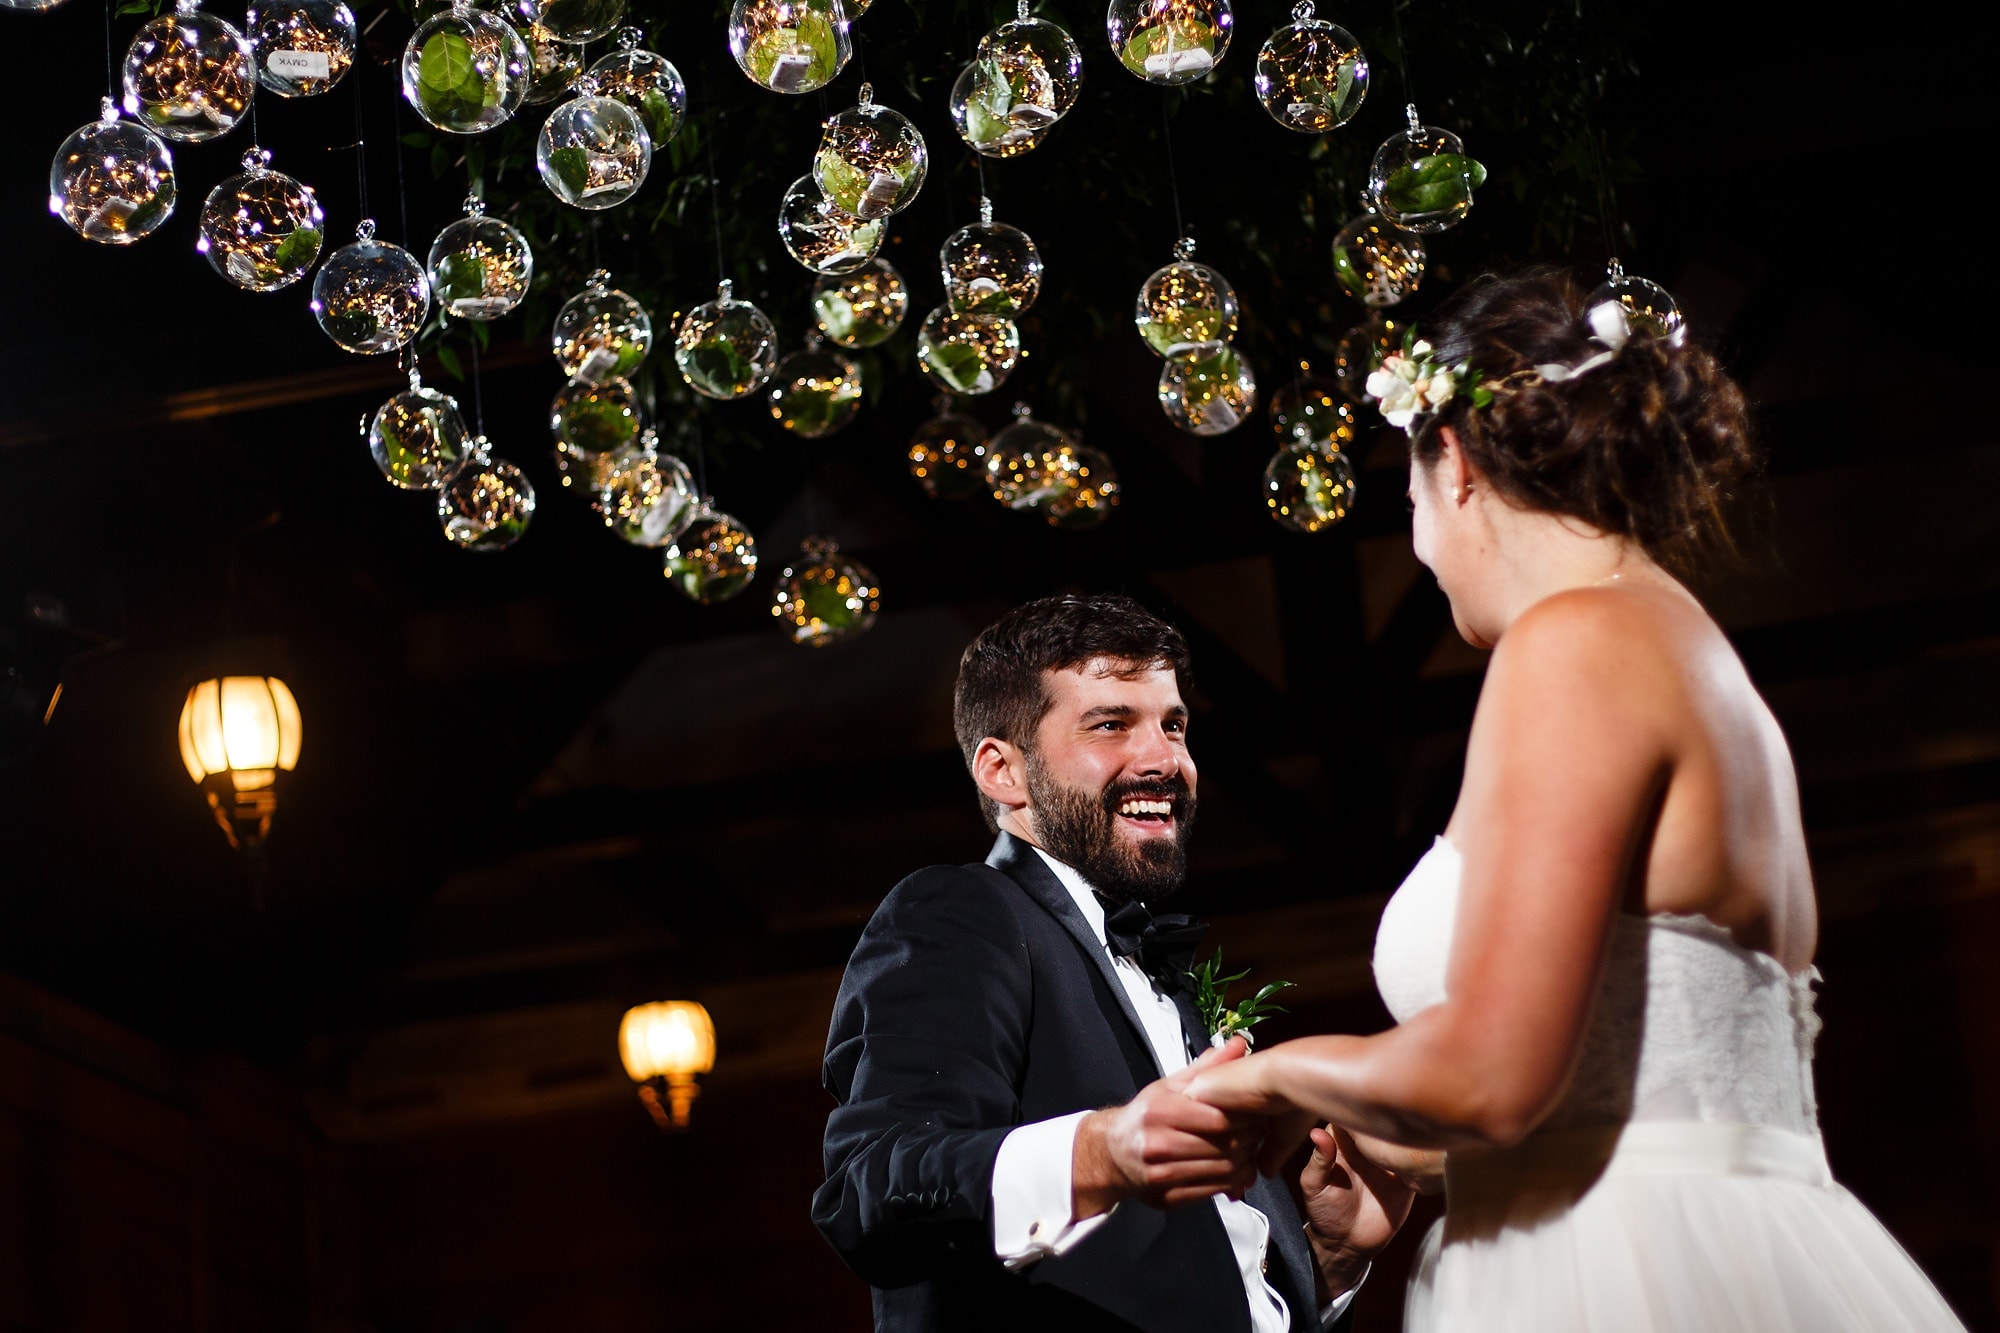 The Bride and groom share their first dance surrounded by glass globes at the reception at Piney River Ranch near Vail, Colorado.